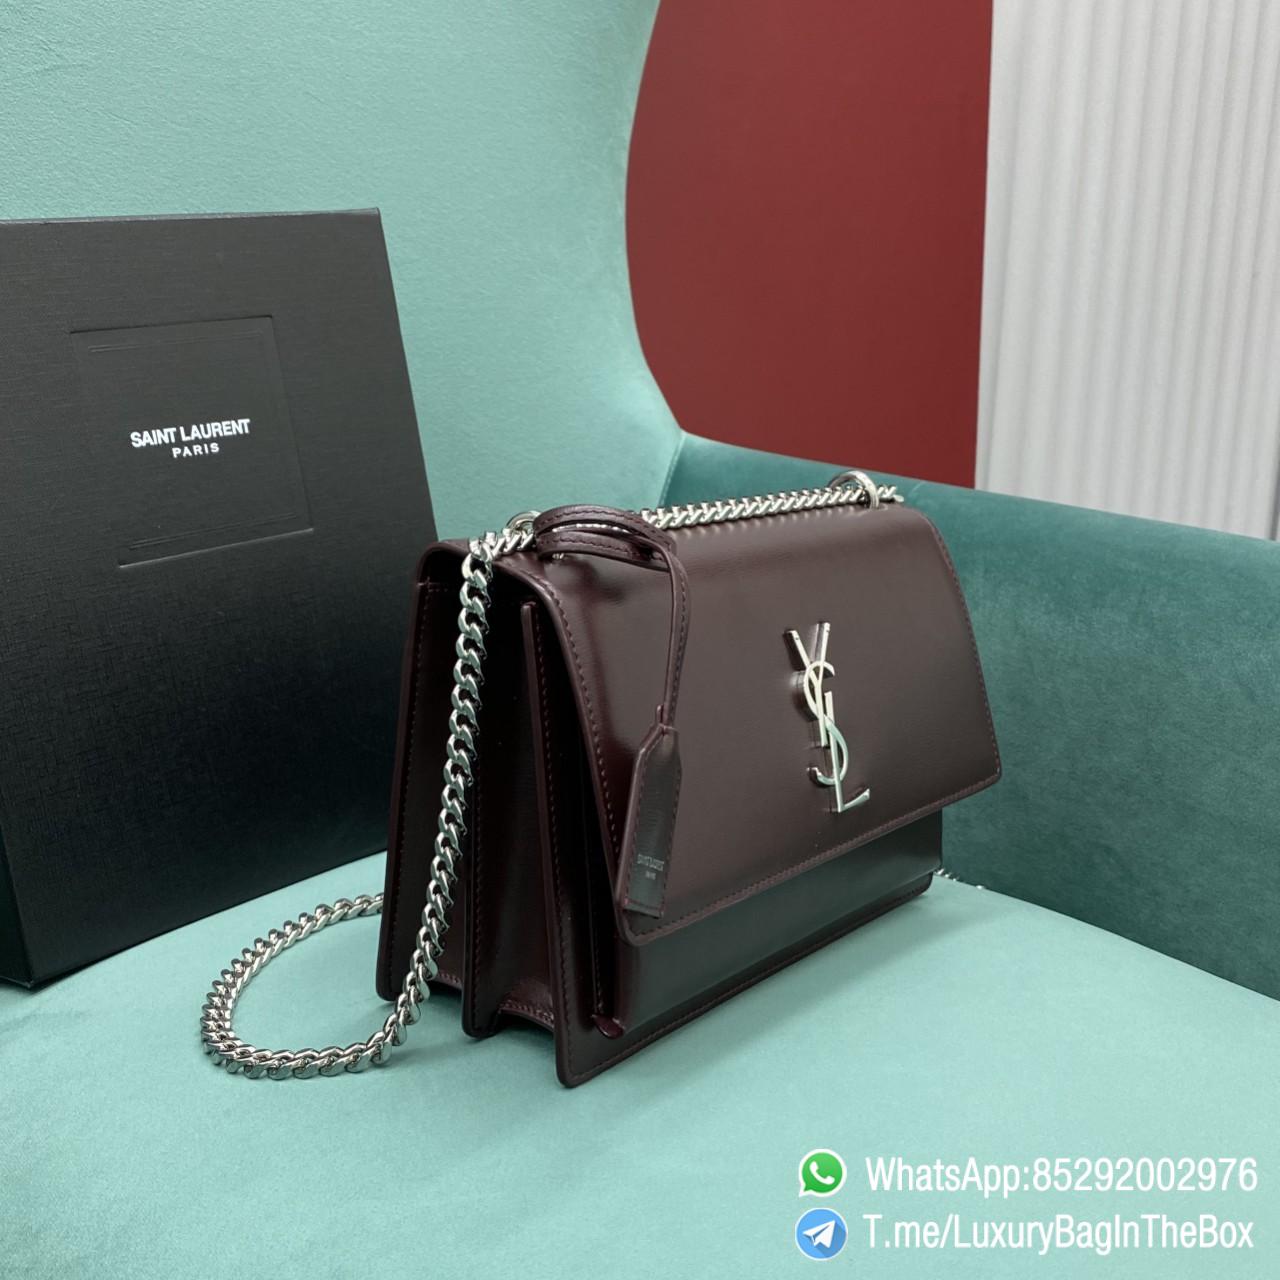 Best Replica YSL Sunset Handbag 442906 Rouge Legion Smooth Leather with Front Flap Chain and Leather Shoulder Strap Silver Metal YSL Initials 02